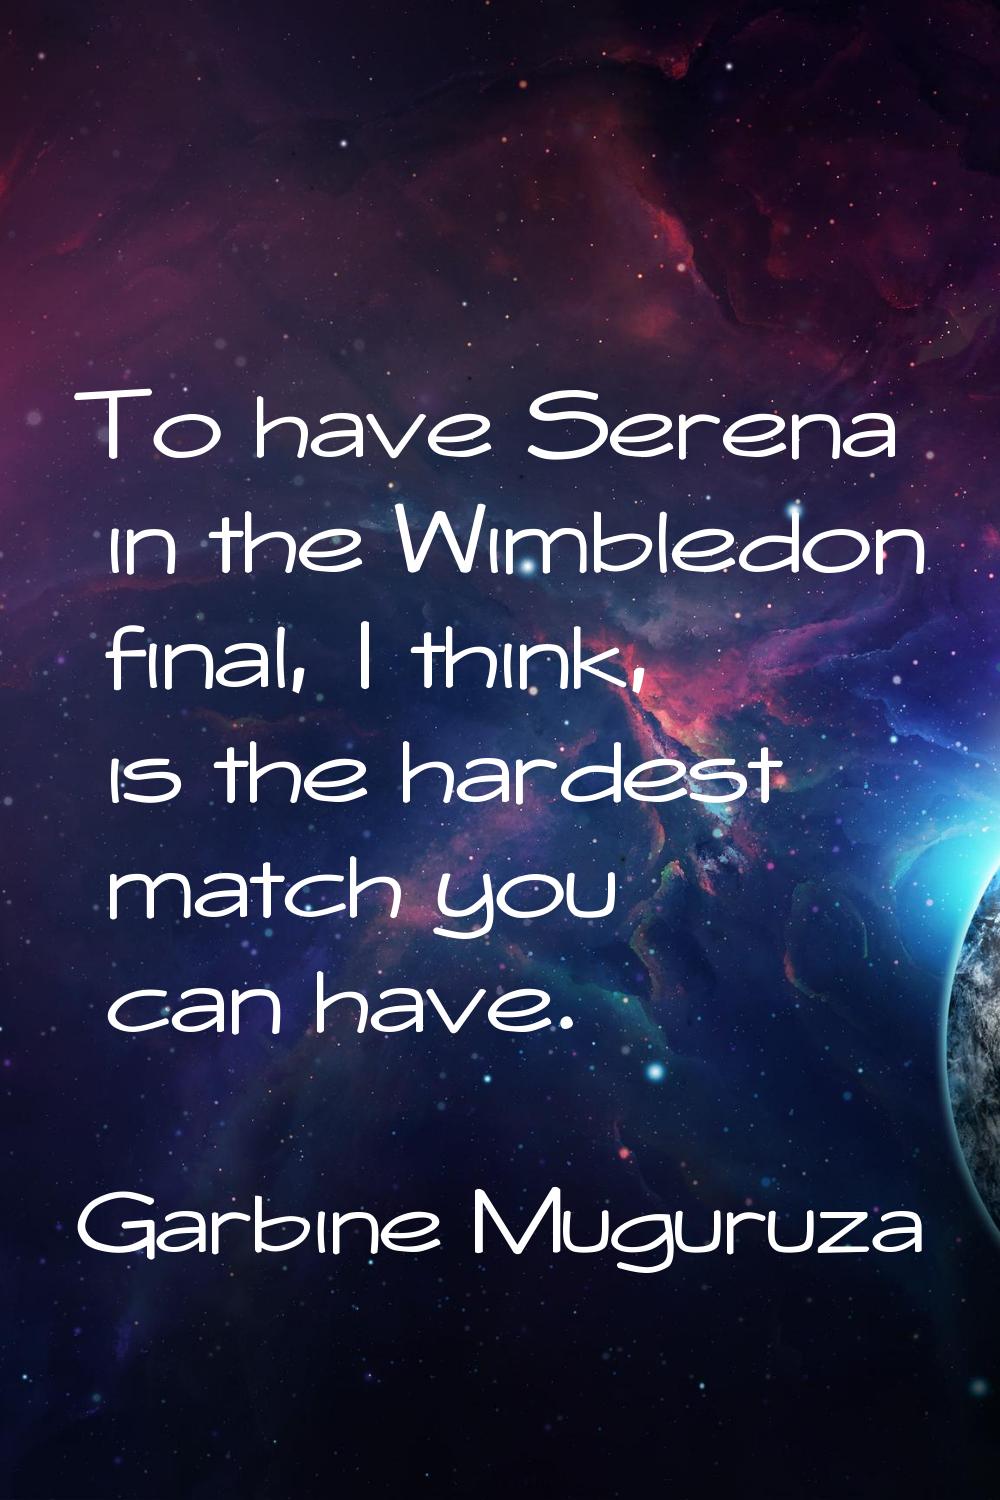 To have Serena in the Wimbledon final, I think, is the hardest match you can have.